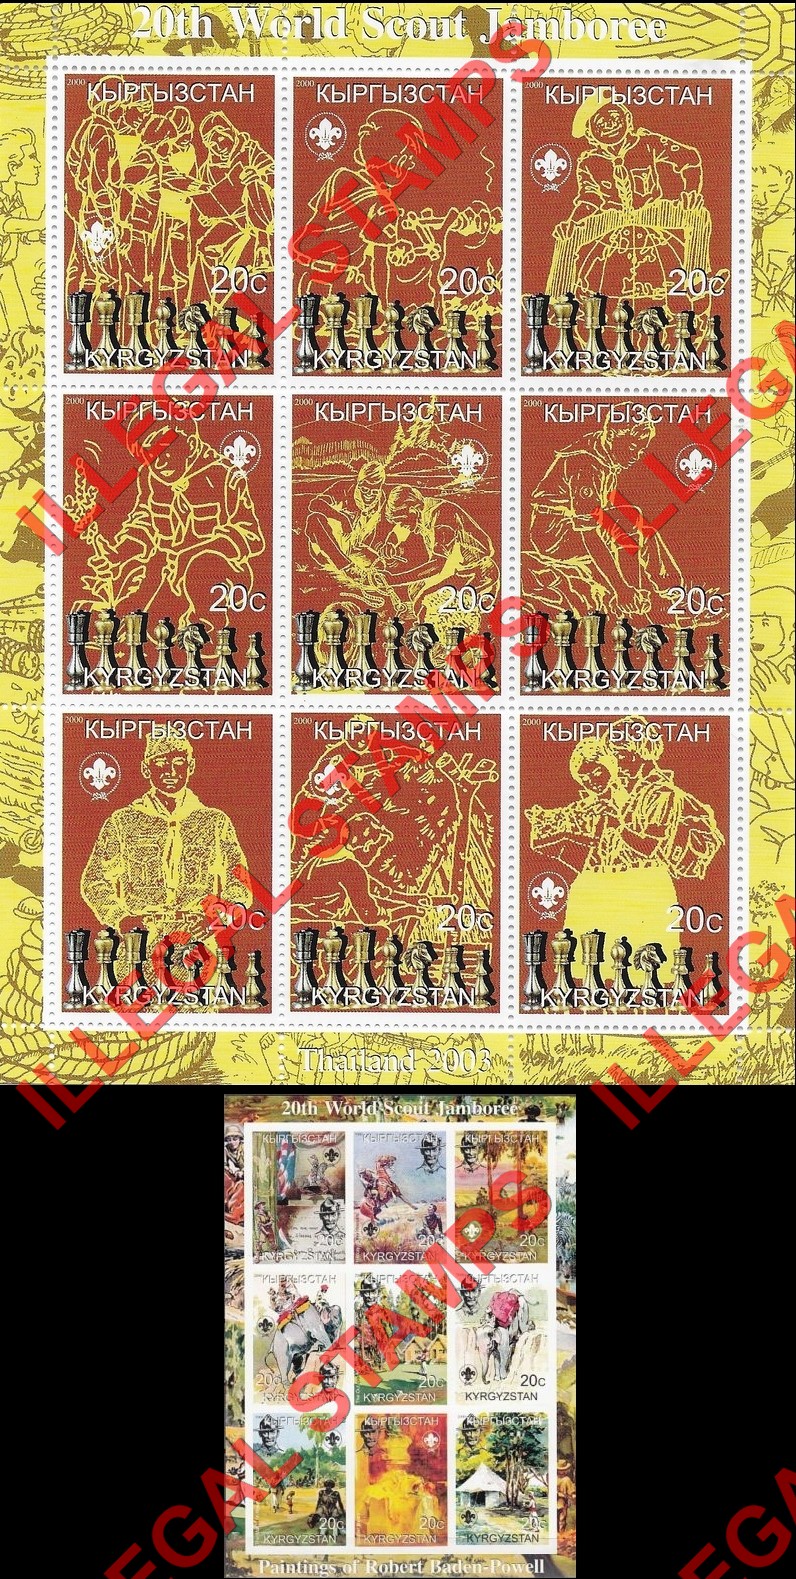 Kyrgyzstan 2000 20th World Scout Jamboree 2003 Stamp Exhibit Chess and Baden Powell Paintings Illegal Stamp Sheetlets of Nine